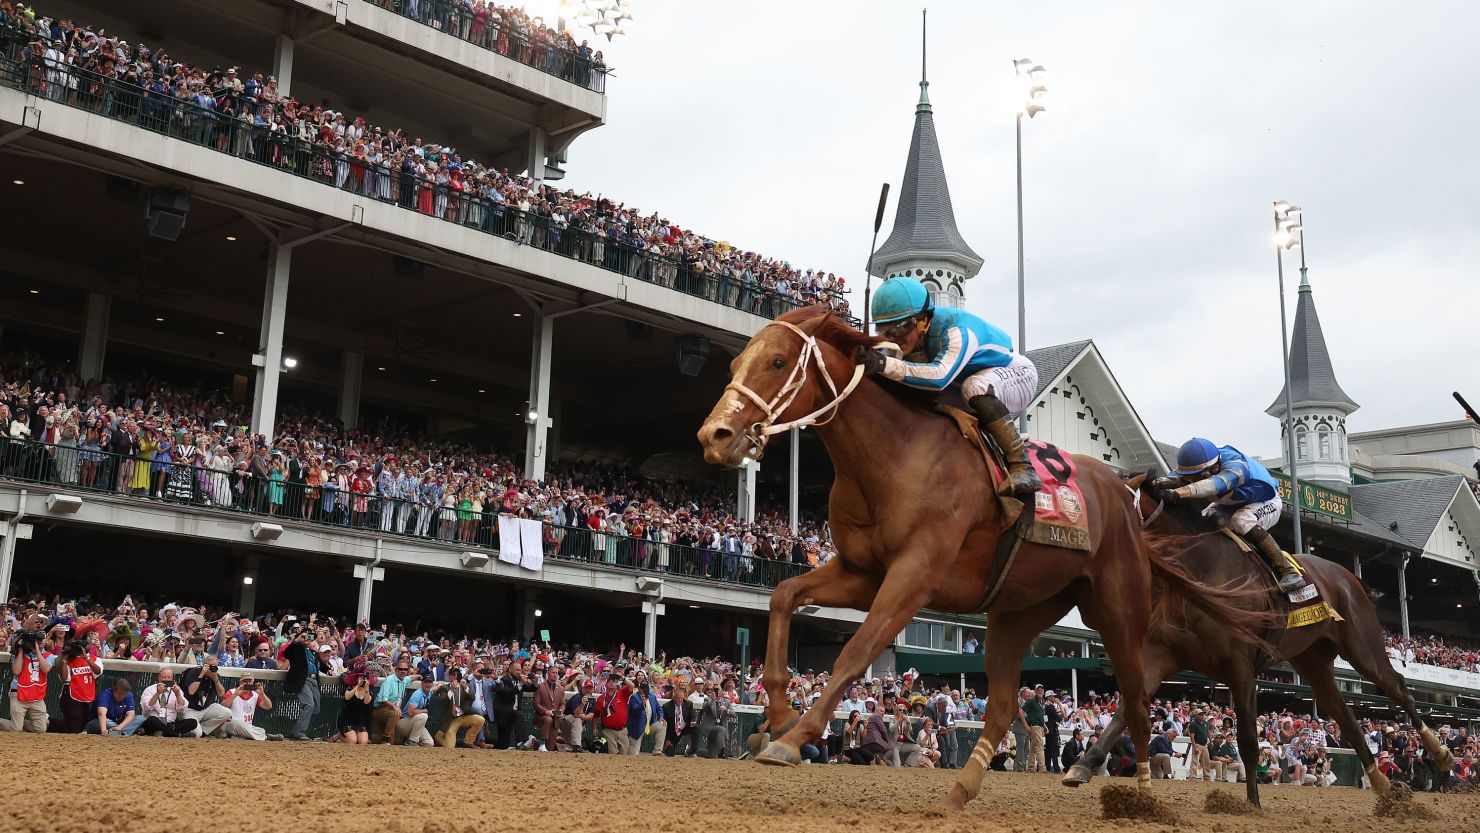 Mage, No. 8, crosses the finish line to win the 149th running of the Kentucky Derby at Churchill Downs on May 06, 2023 in Louisville, Kentucky.